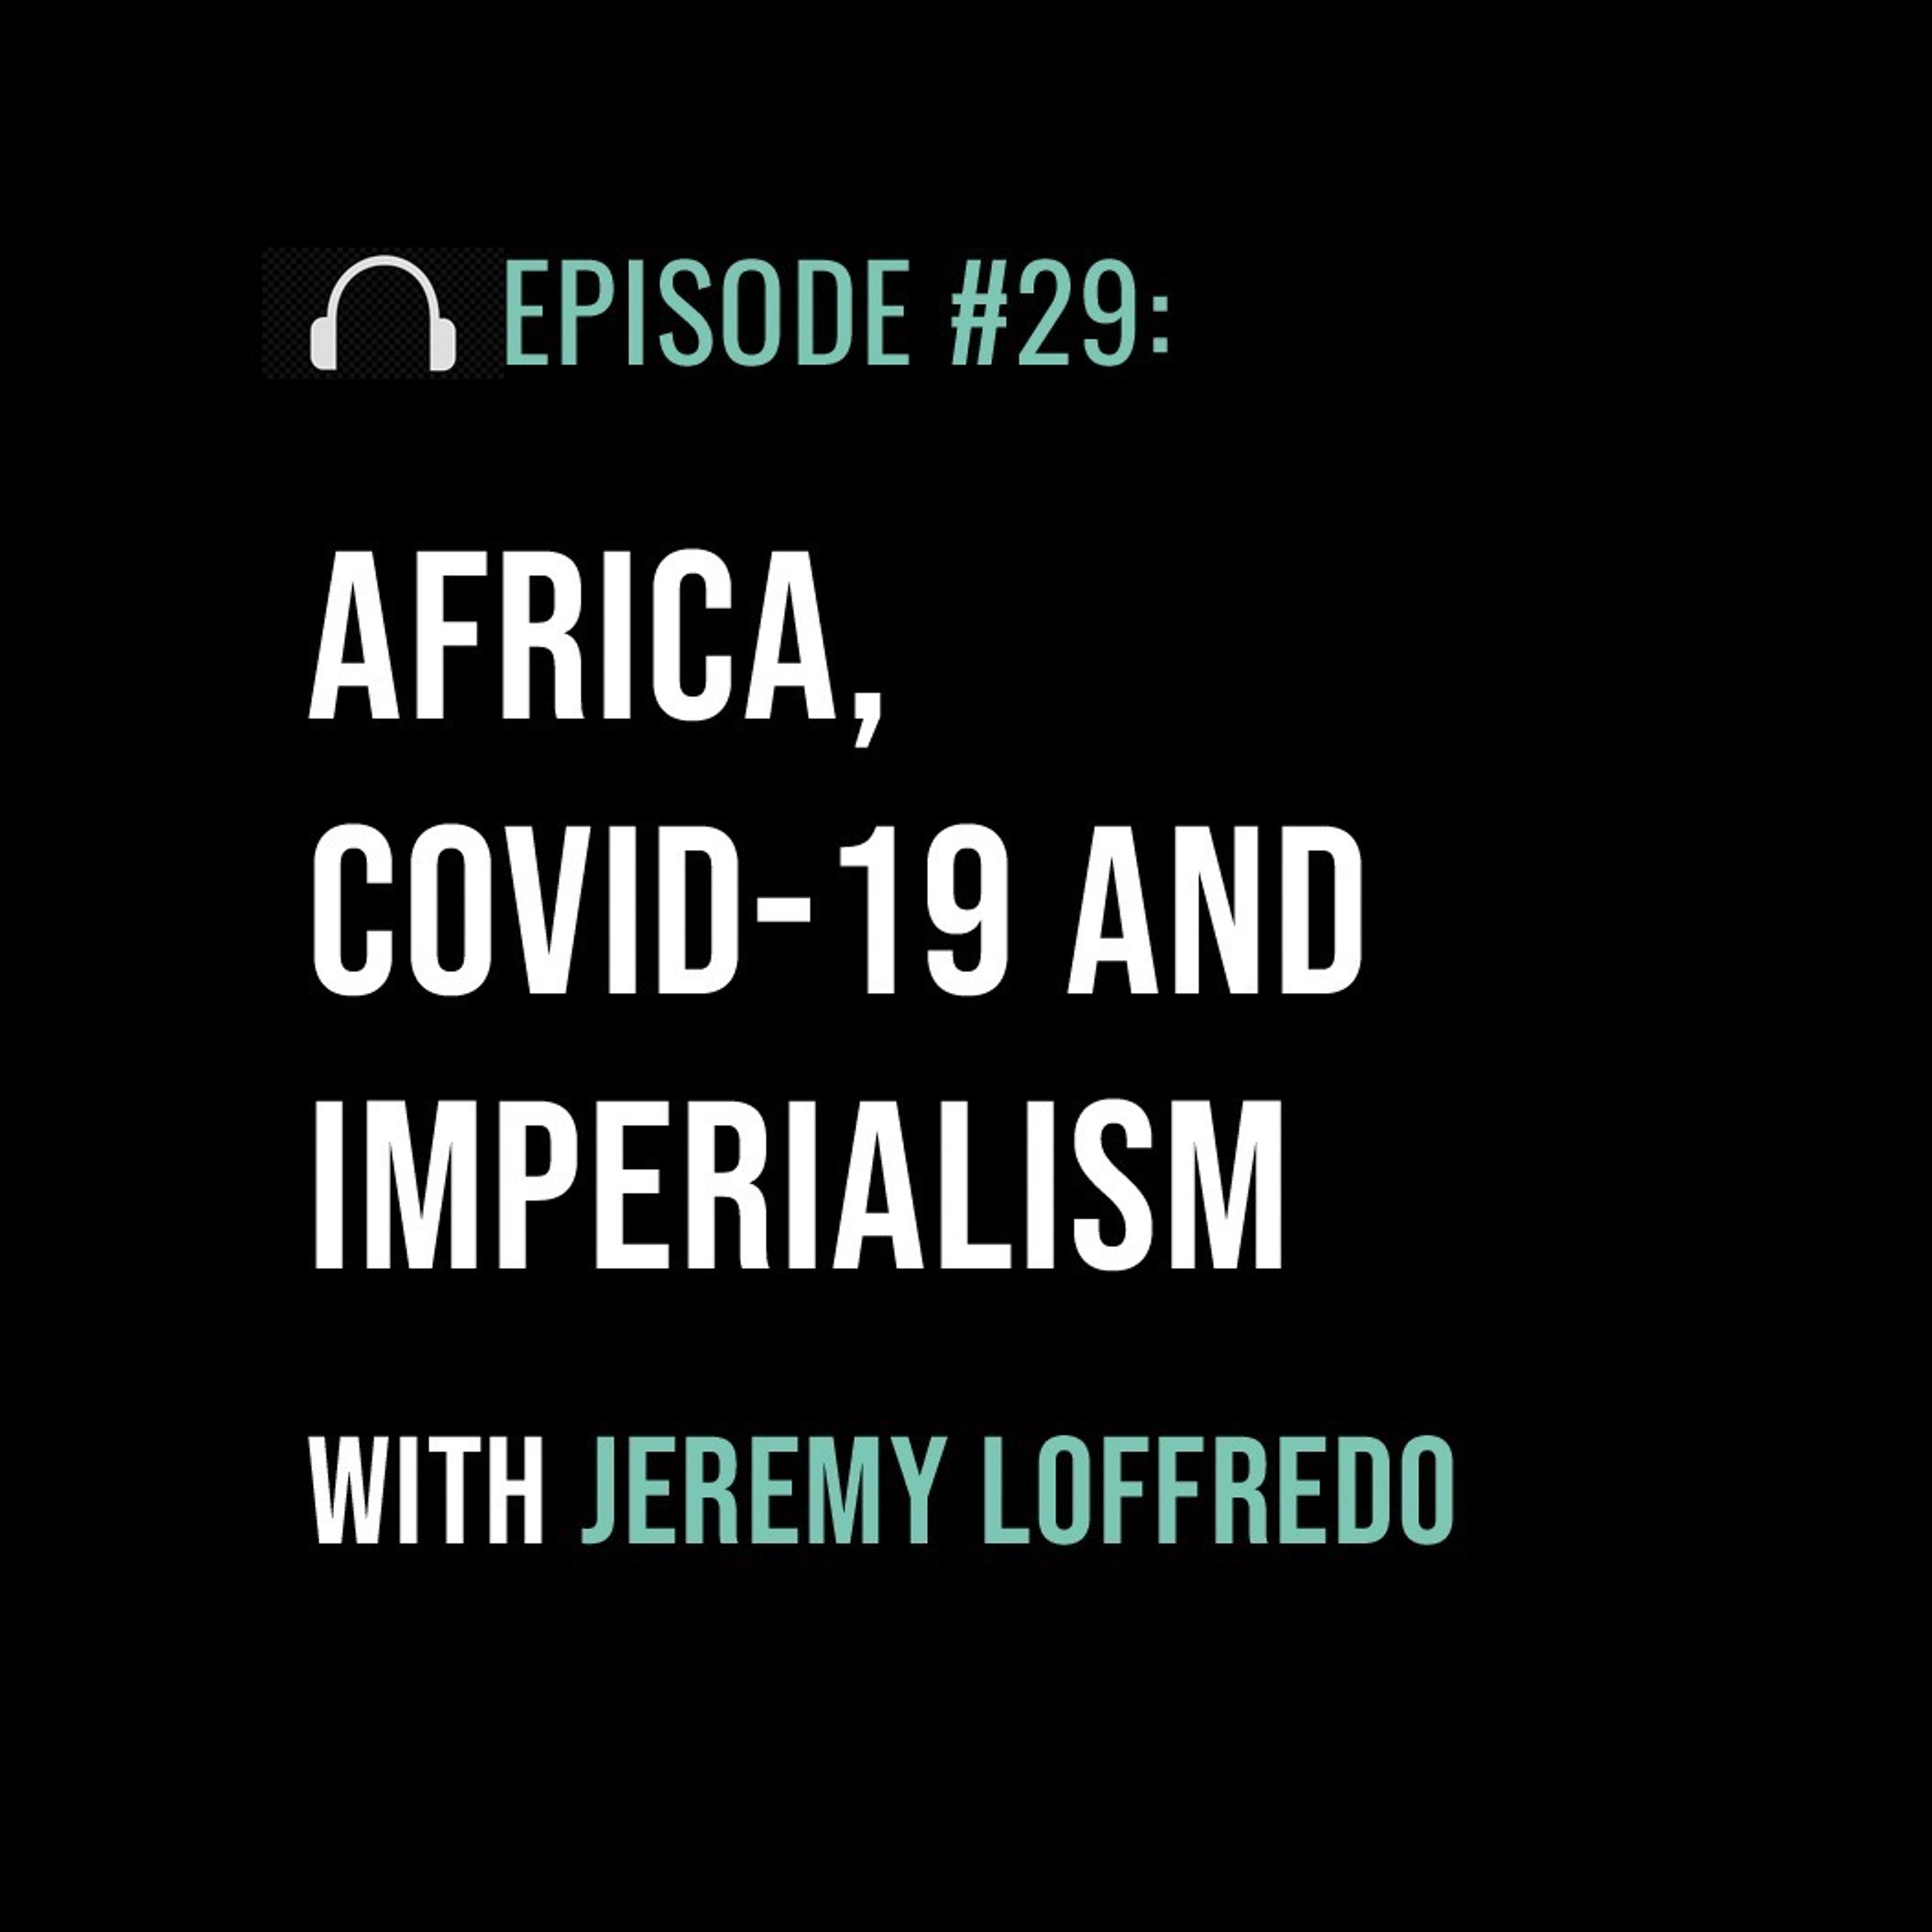 Africa, COVID-19 and Imperialism with Jeremy Loffredo